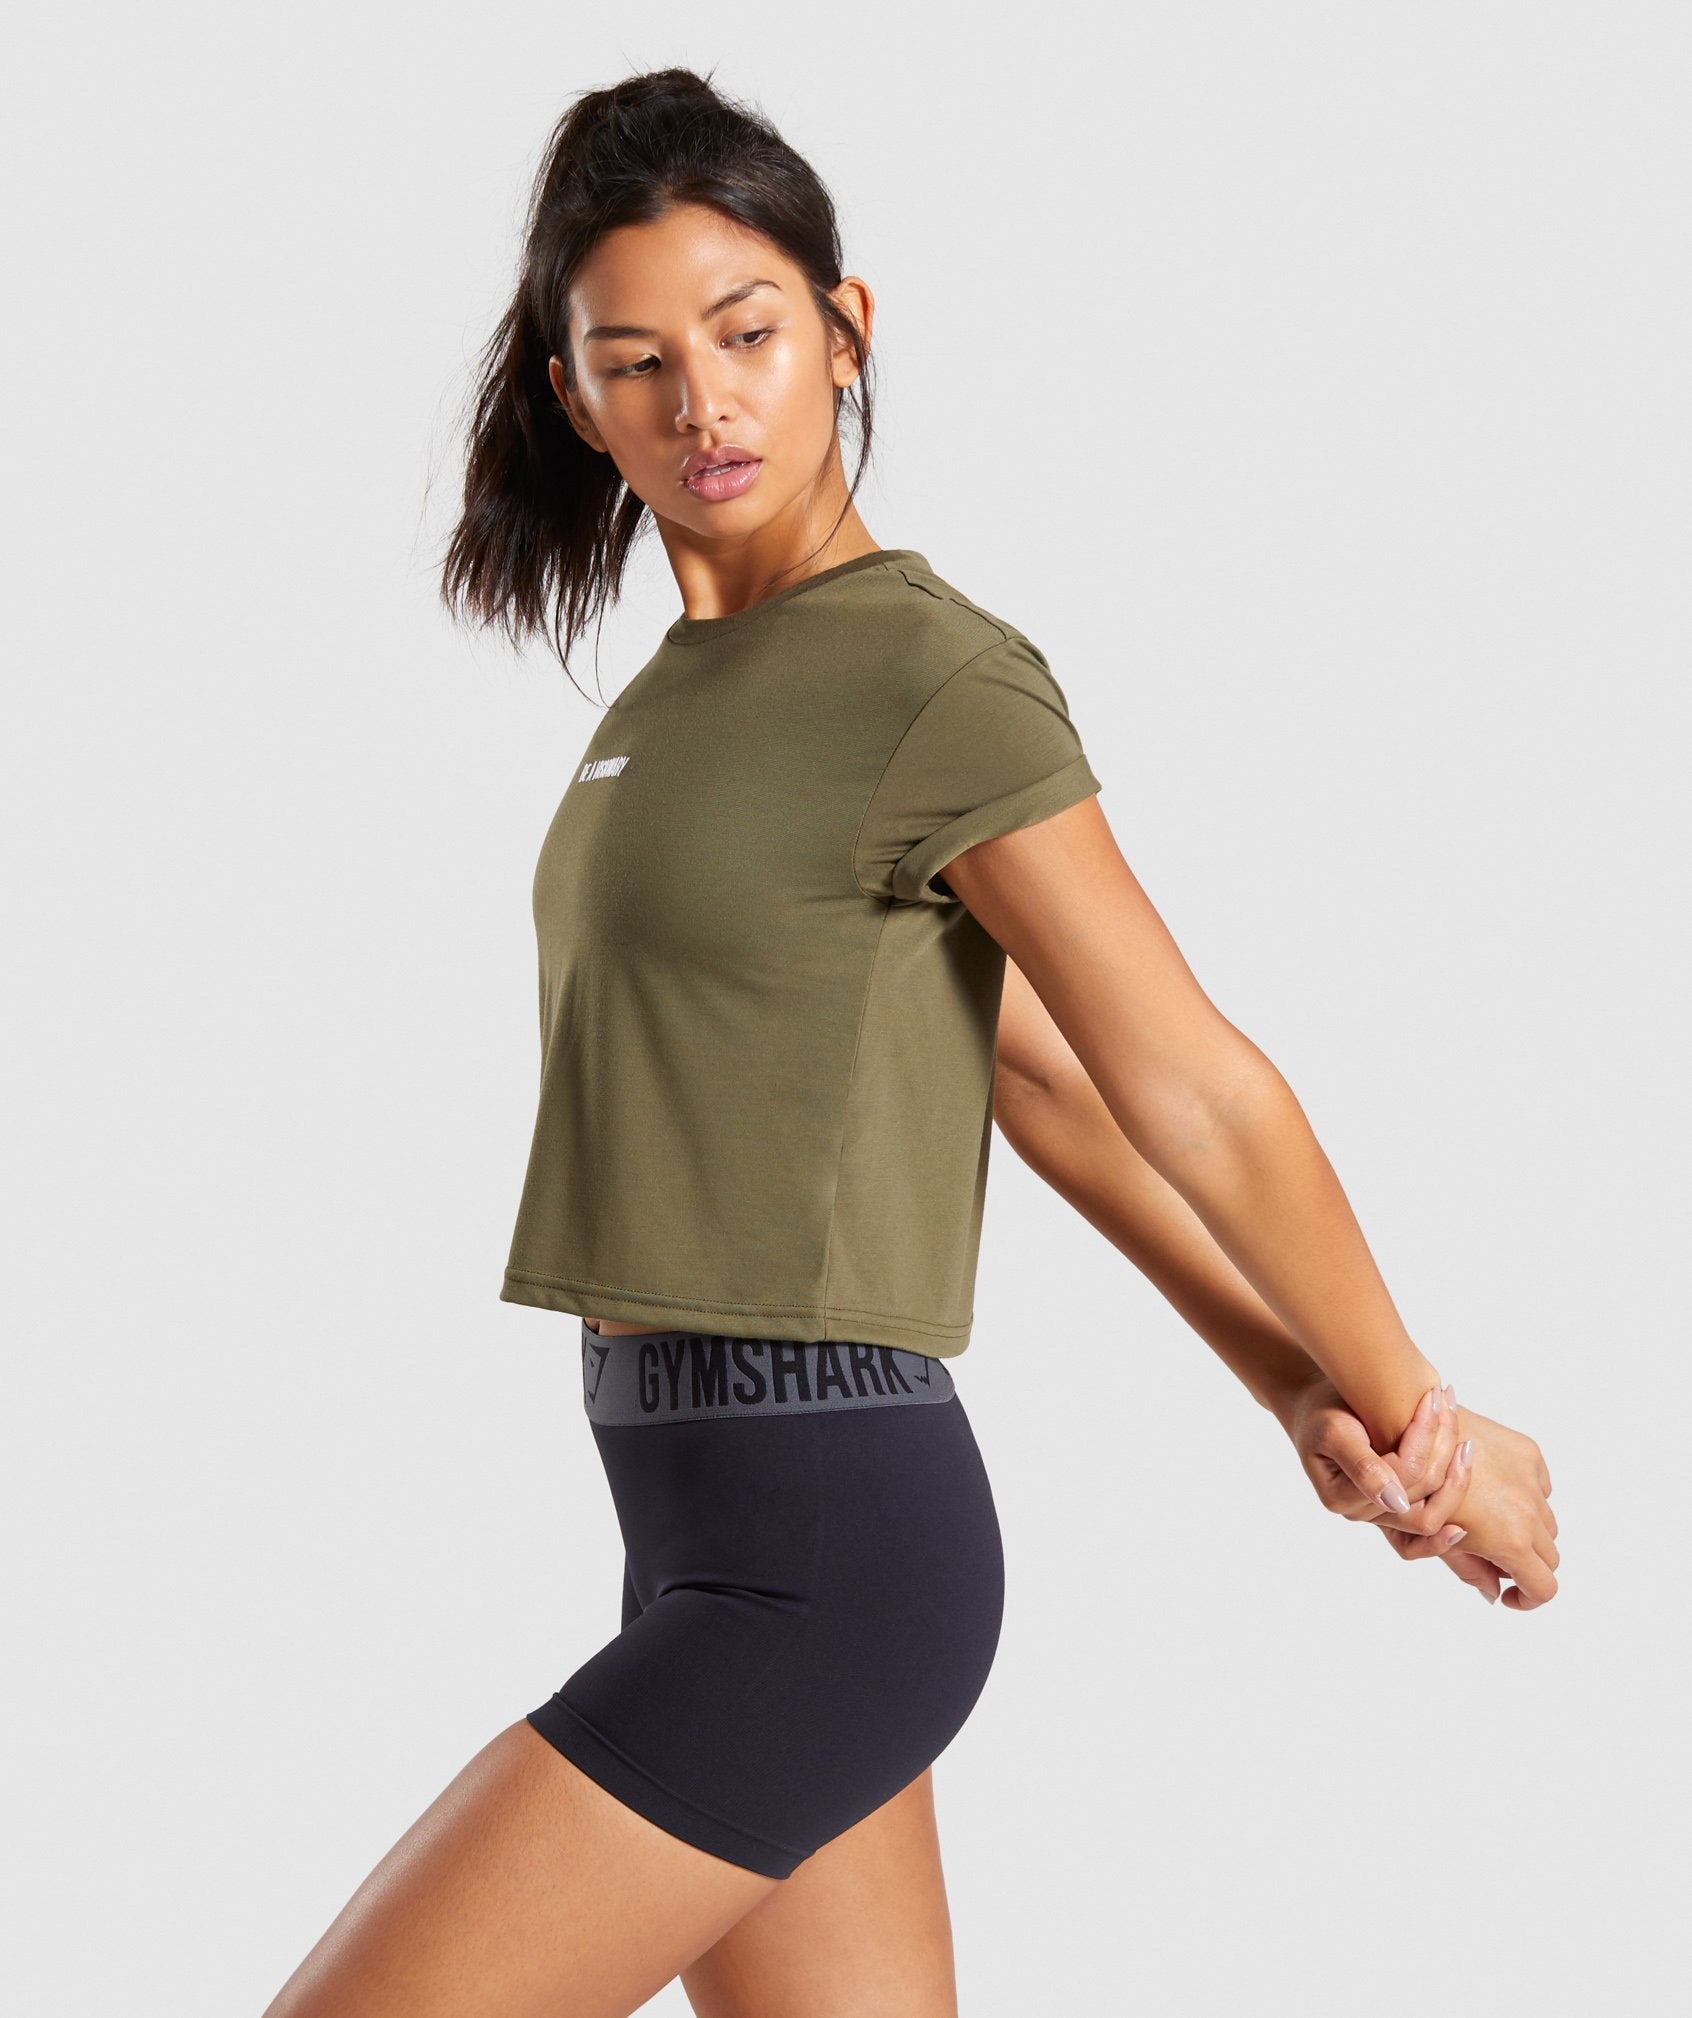 Essential Be a Visionary Tee in Khaki - view 3